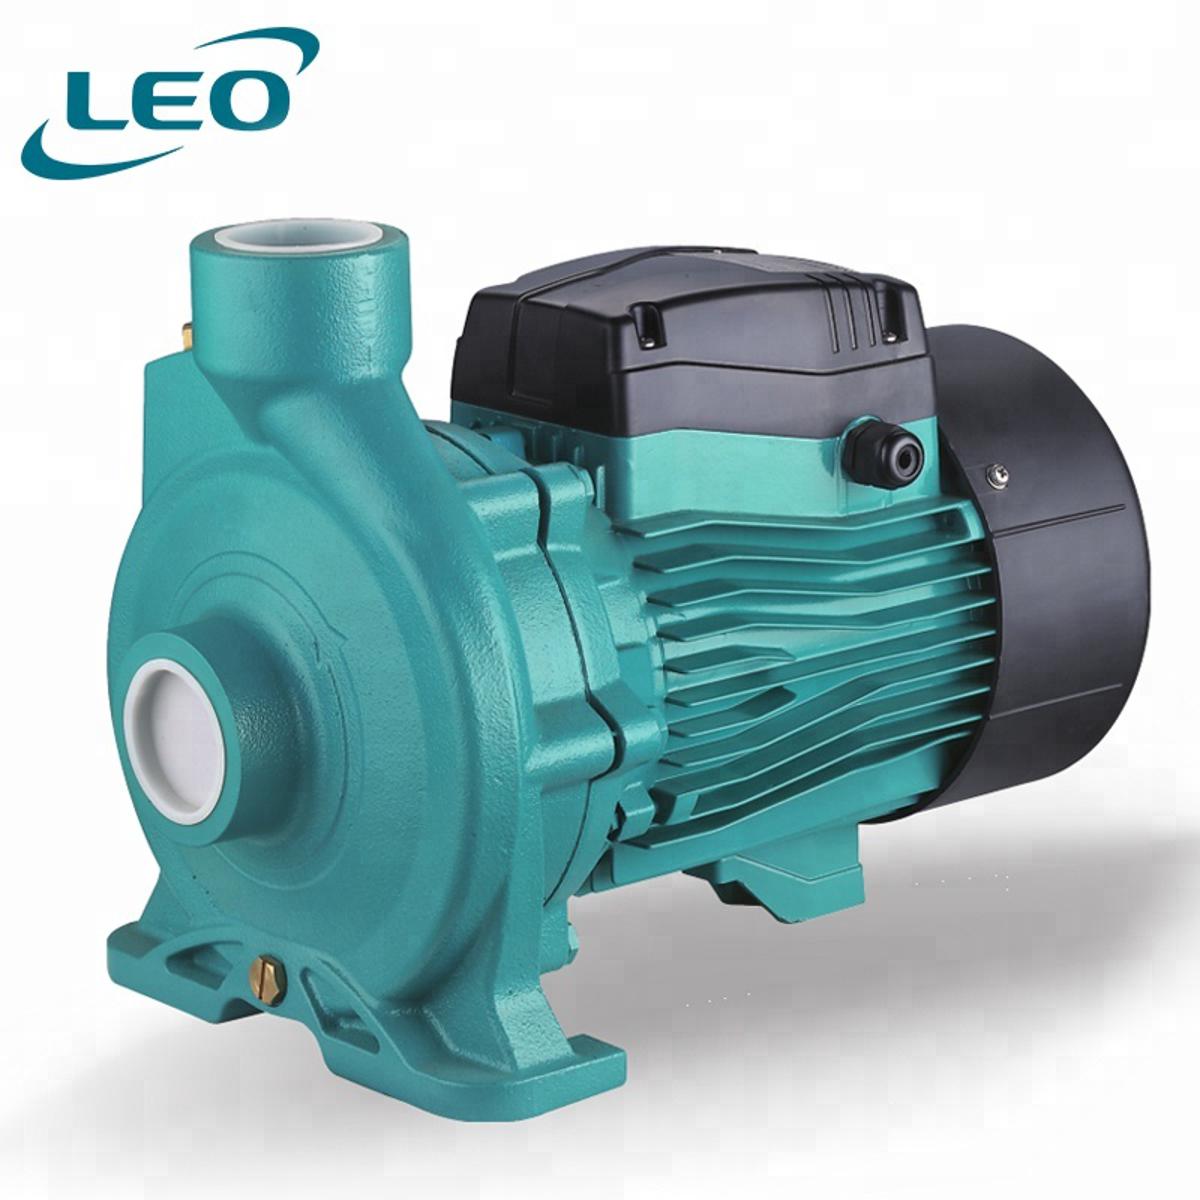 LEO - ACM-400C2- 4000W - 5.5 HP- Clean Water Centrifugal Pump- 180V~220V SINGLE PHASE- SIZE:- 2" X 2"- ITALY Patent DESIGN European STANDARD